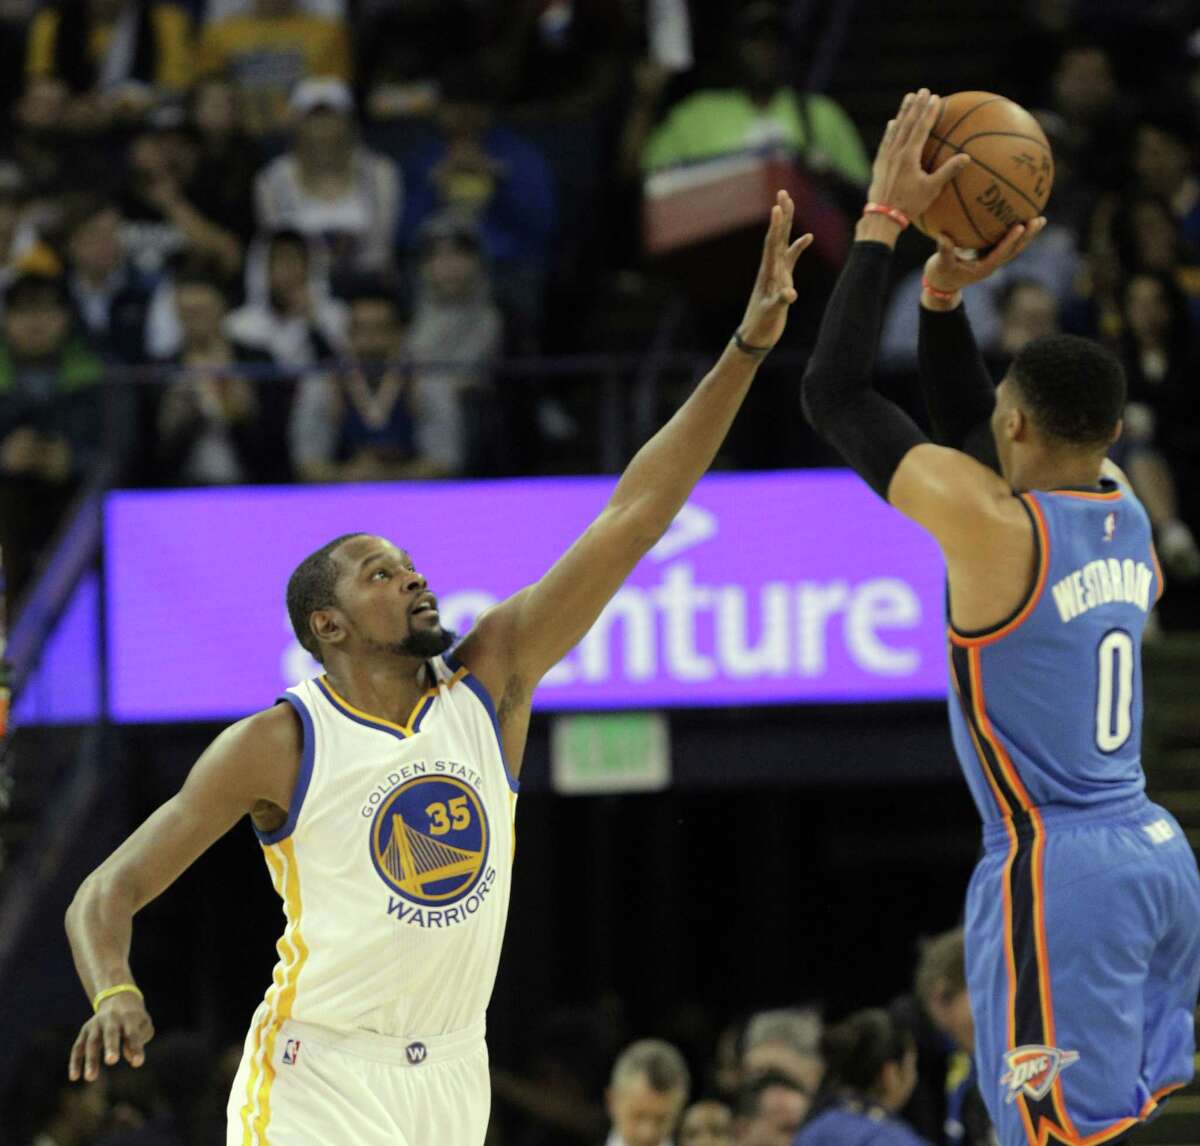 Kevin Durant (35) tries to block a shot by Russell Westbrook (0) as the Golden State Warriors played the Oklahoma City Thunder at Oracle Arena in Oakland, Calif., on Wednesday, January 18, 2017.